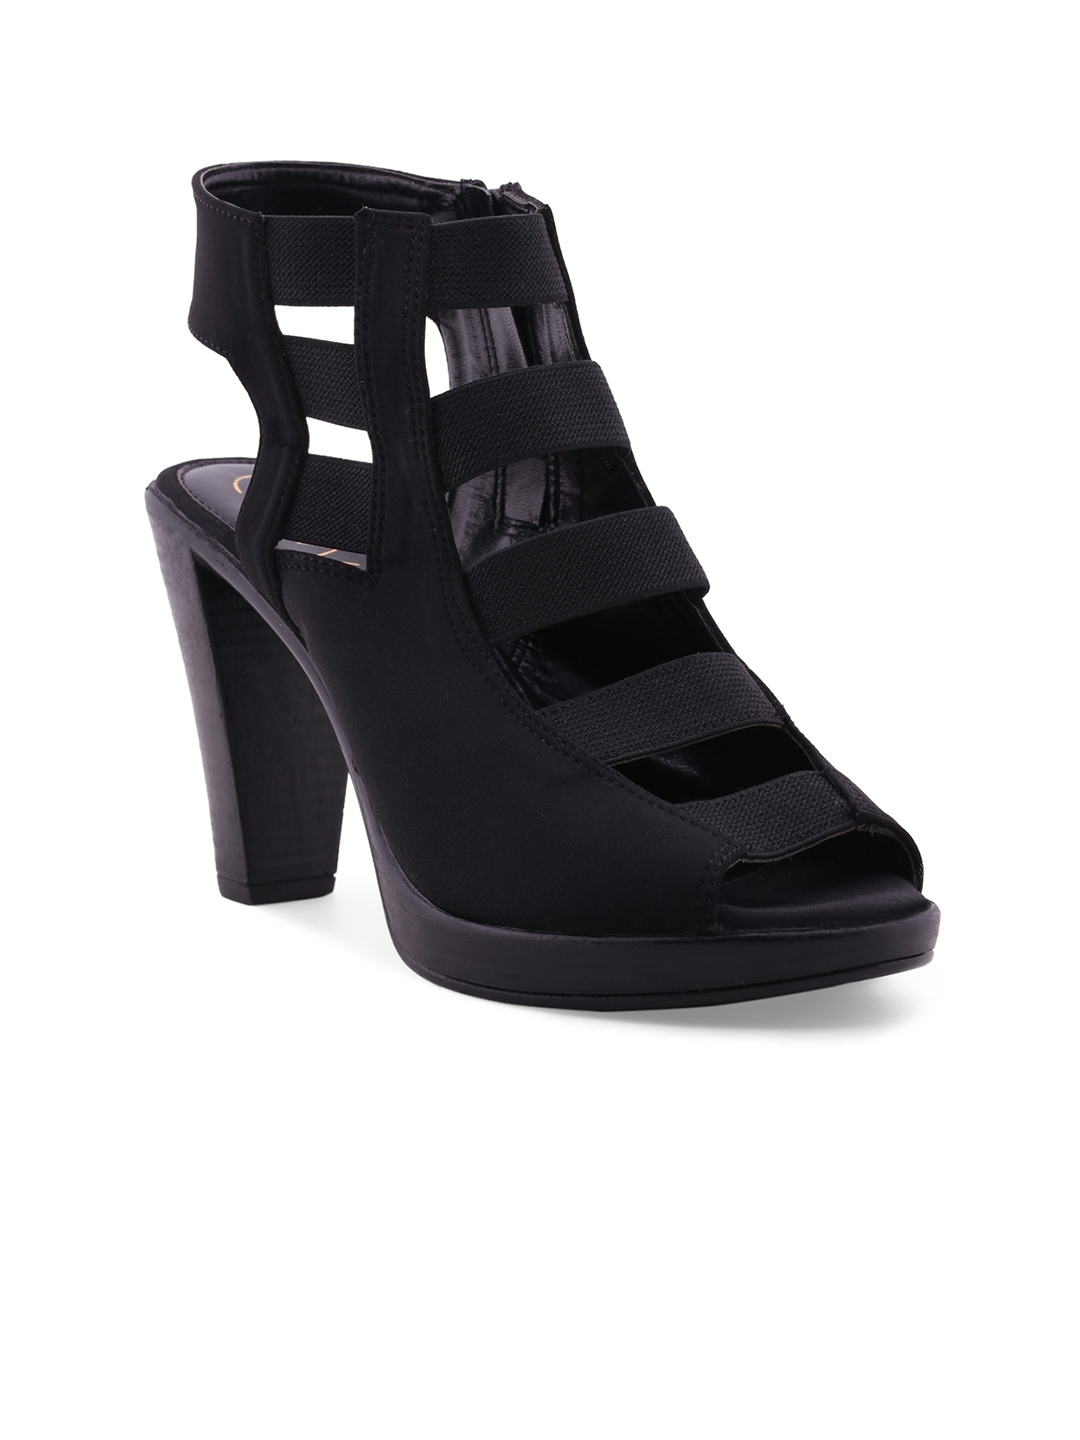 High Heeled Sandals For Women  Buy High Heeled Sandals For Women online in  India